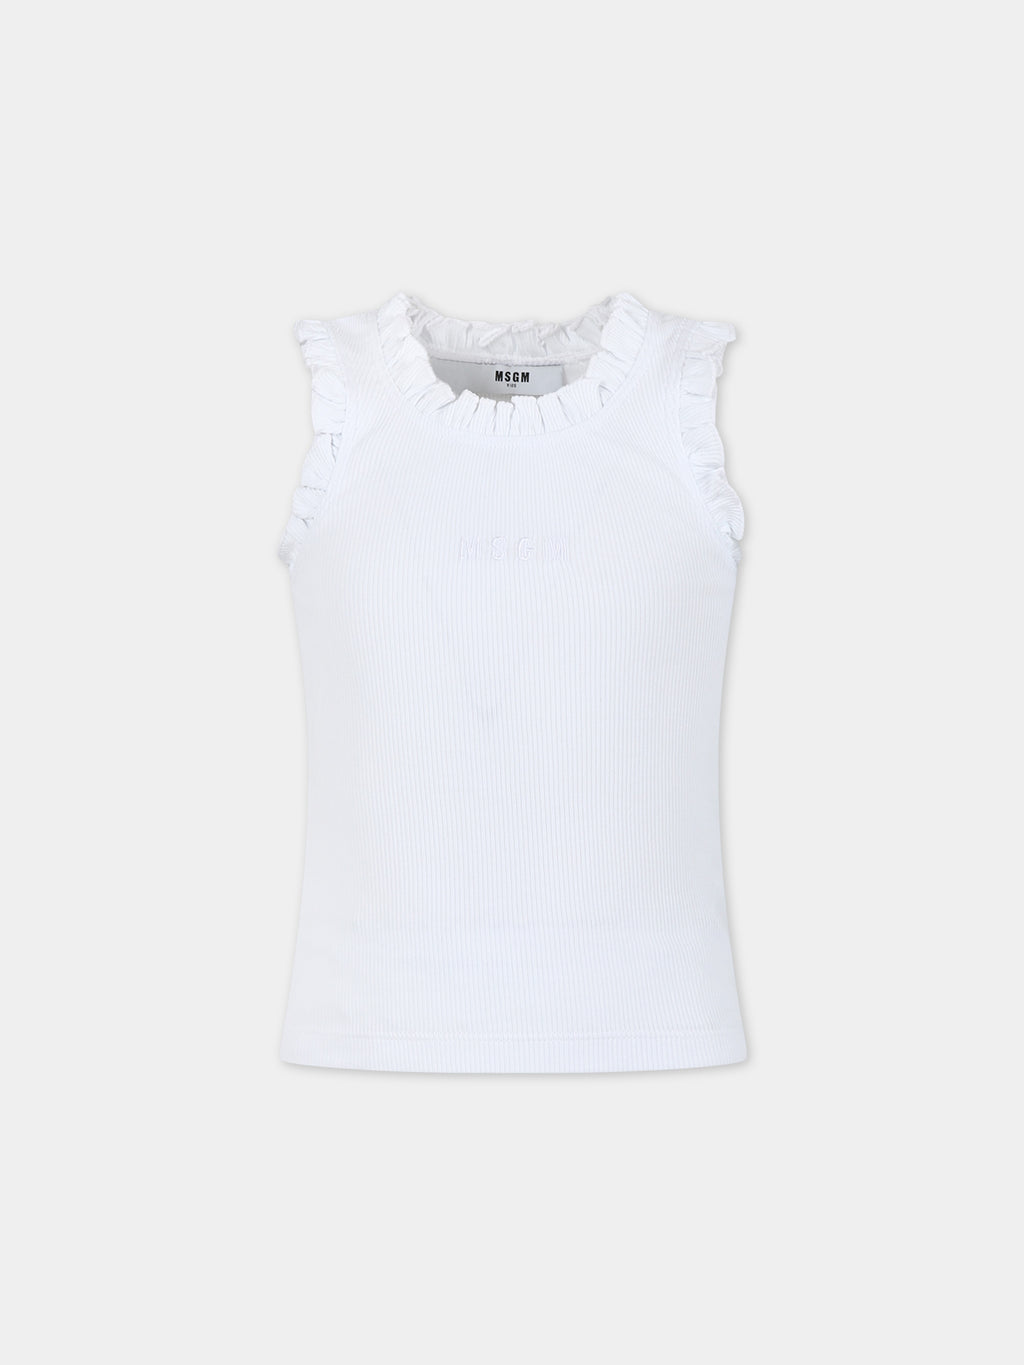 White tank top for girl with ruffles